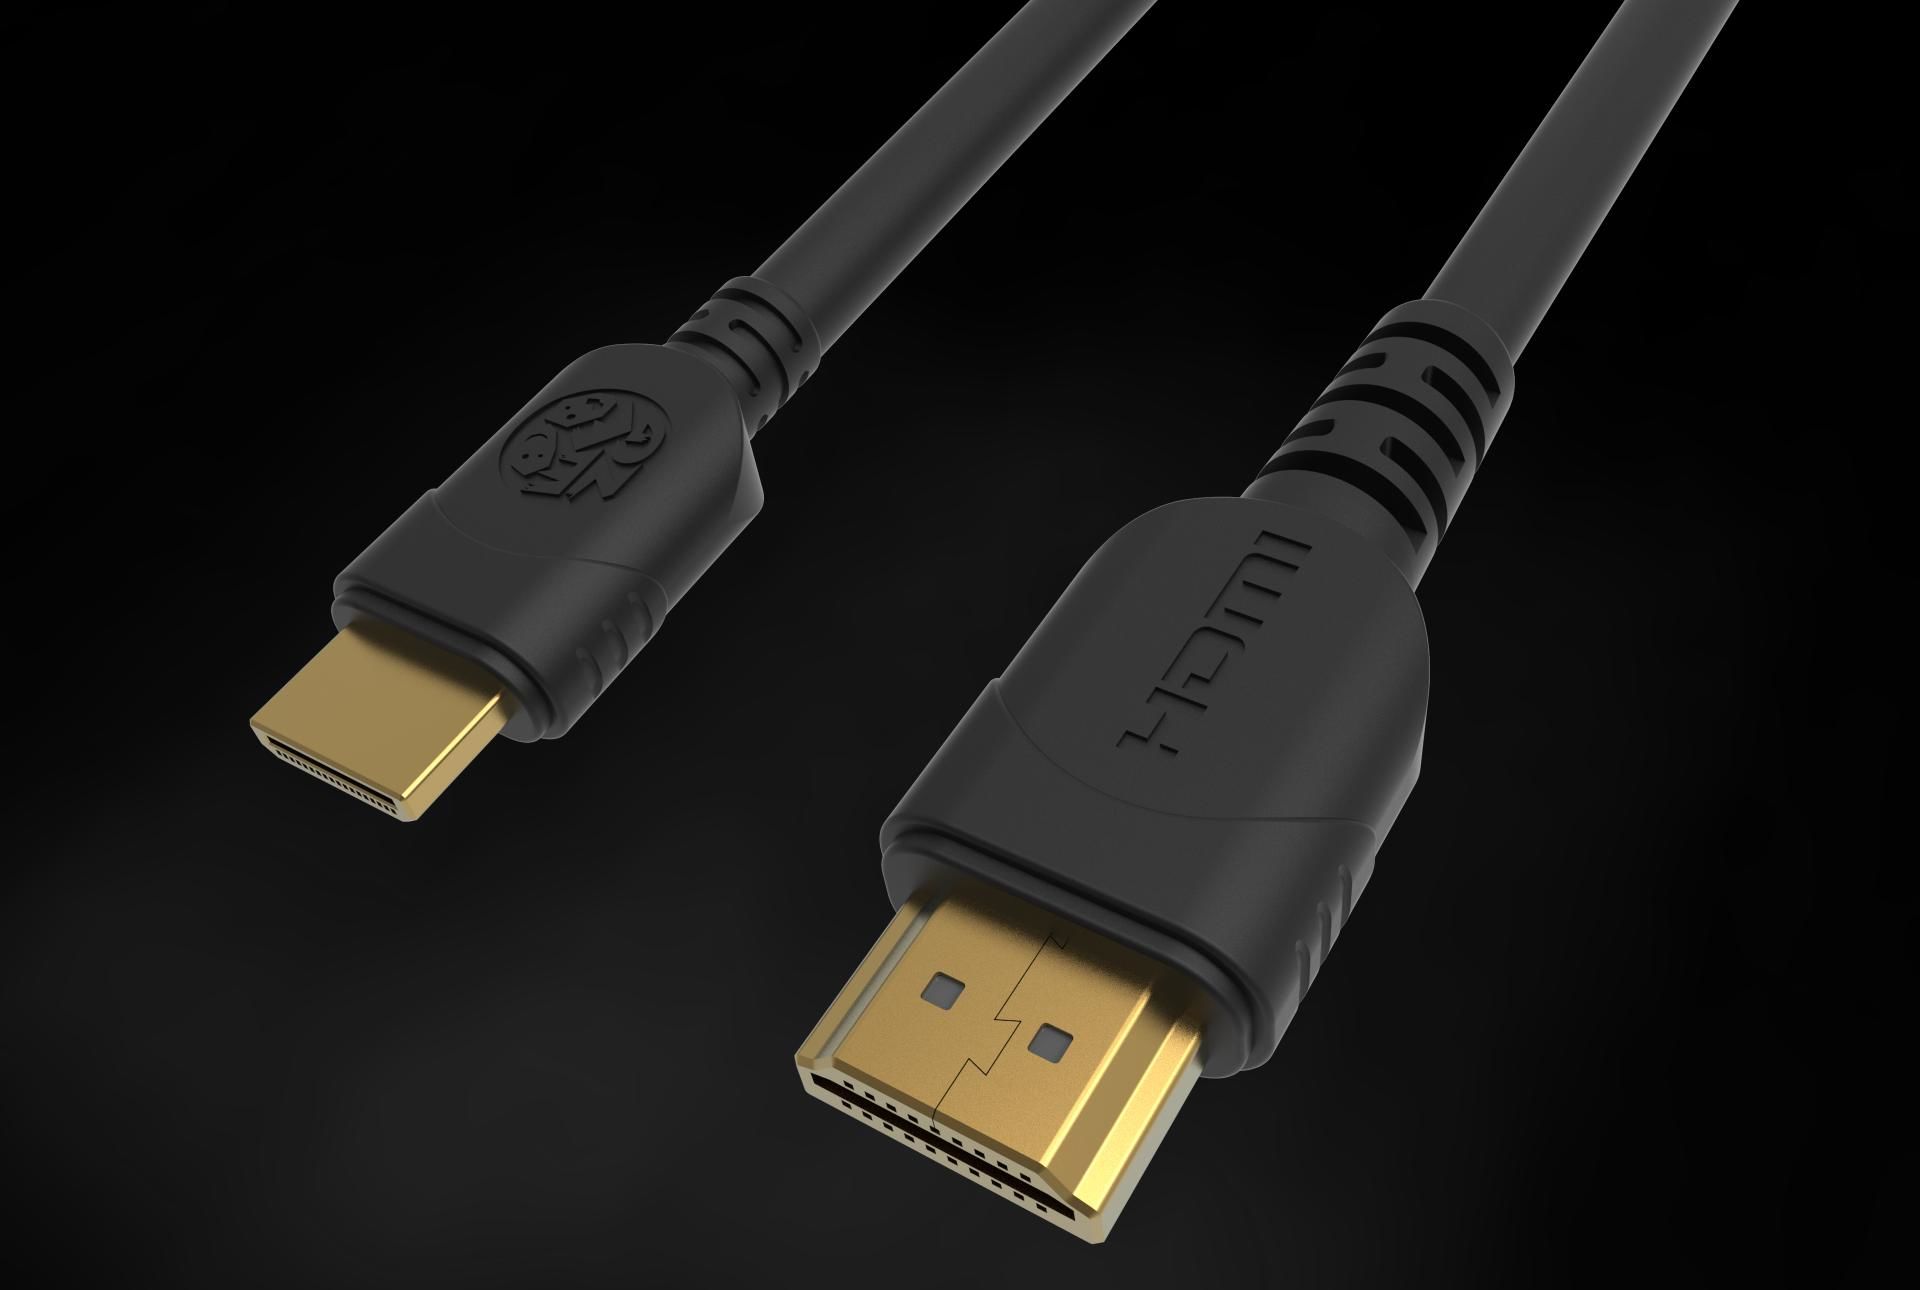 SNK Neo Geo Mini Official HDMI Cable